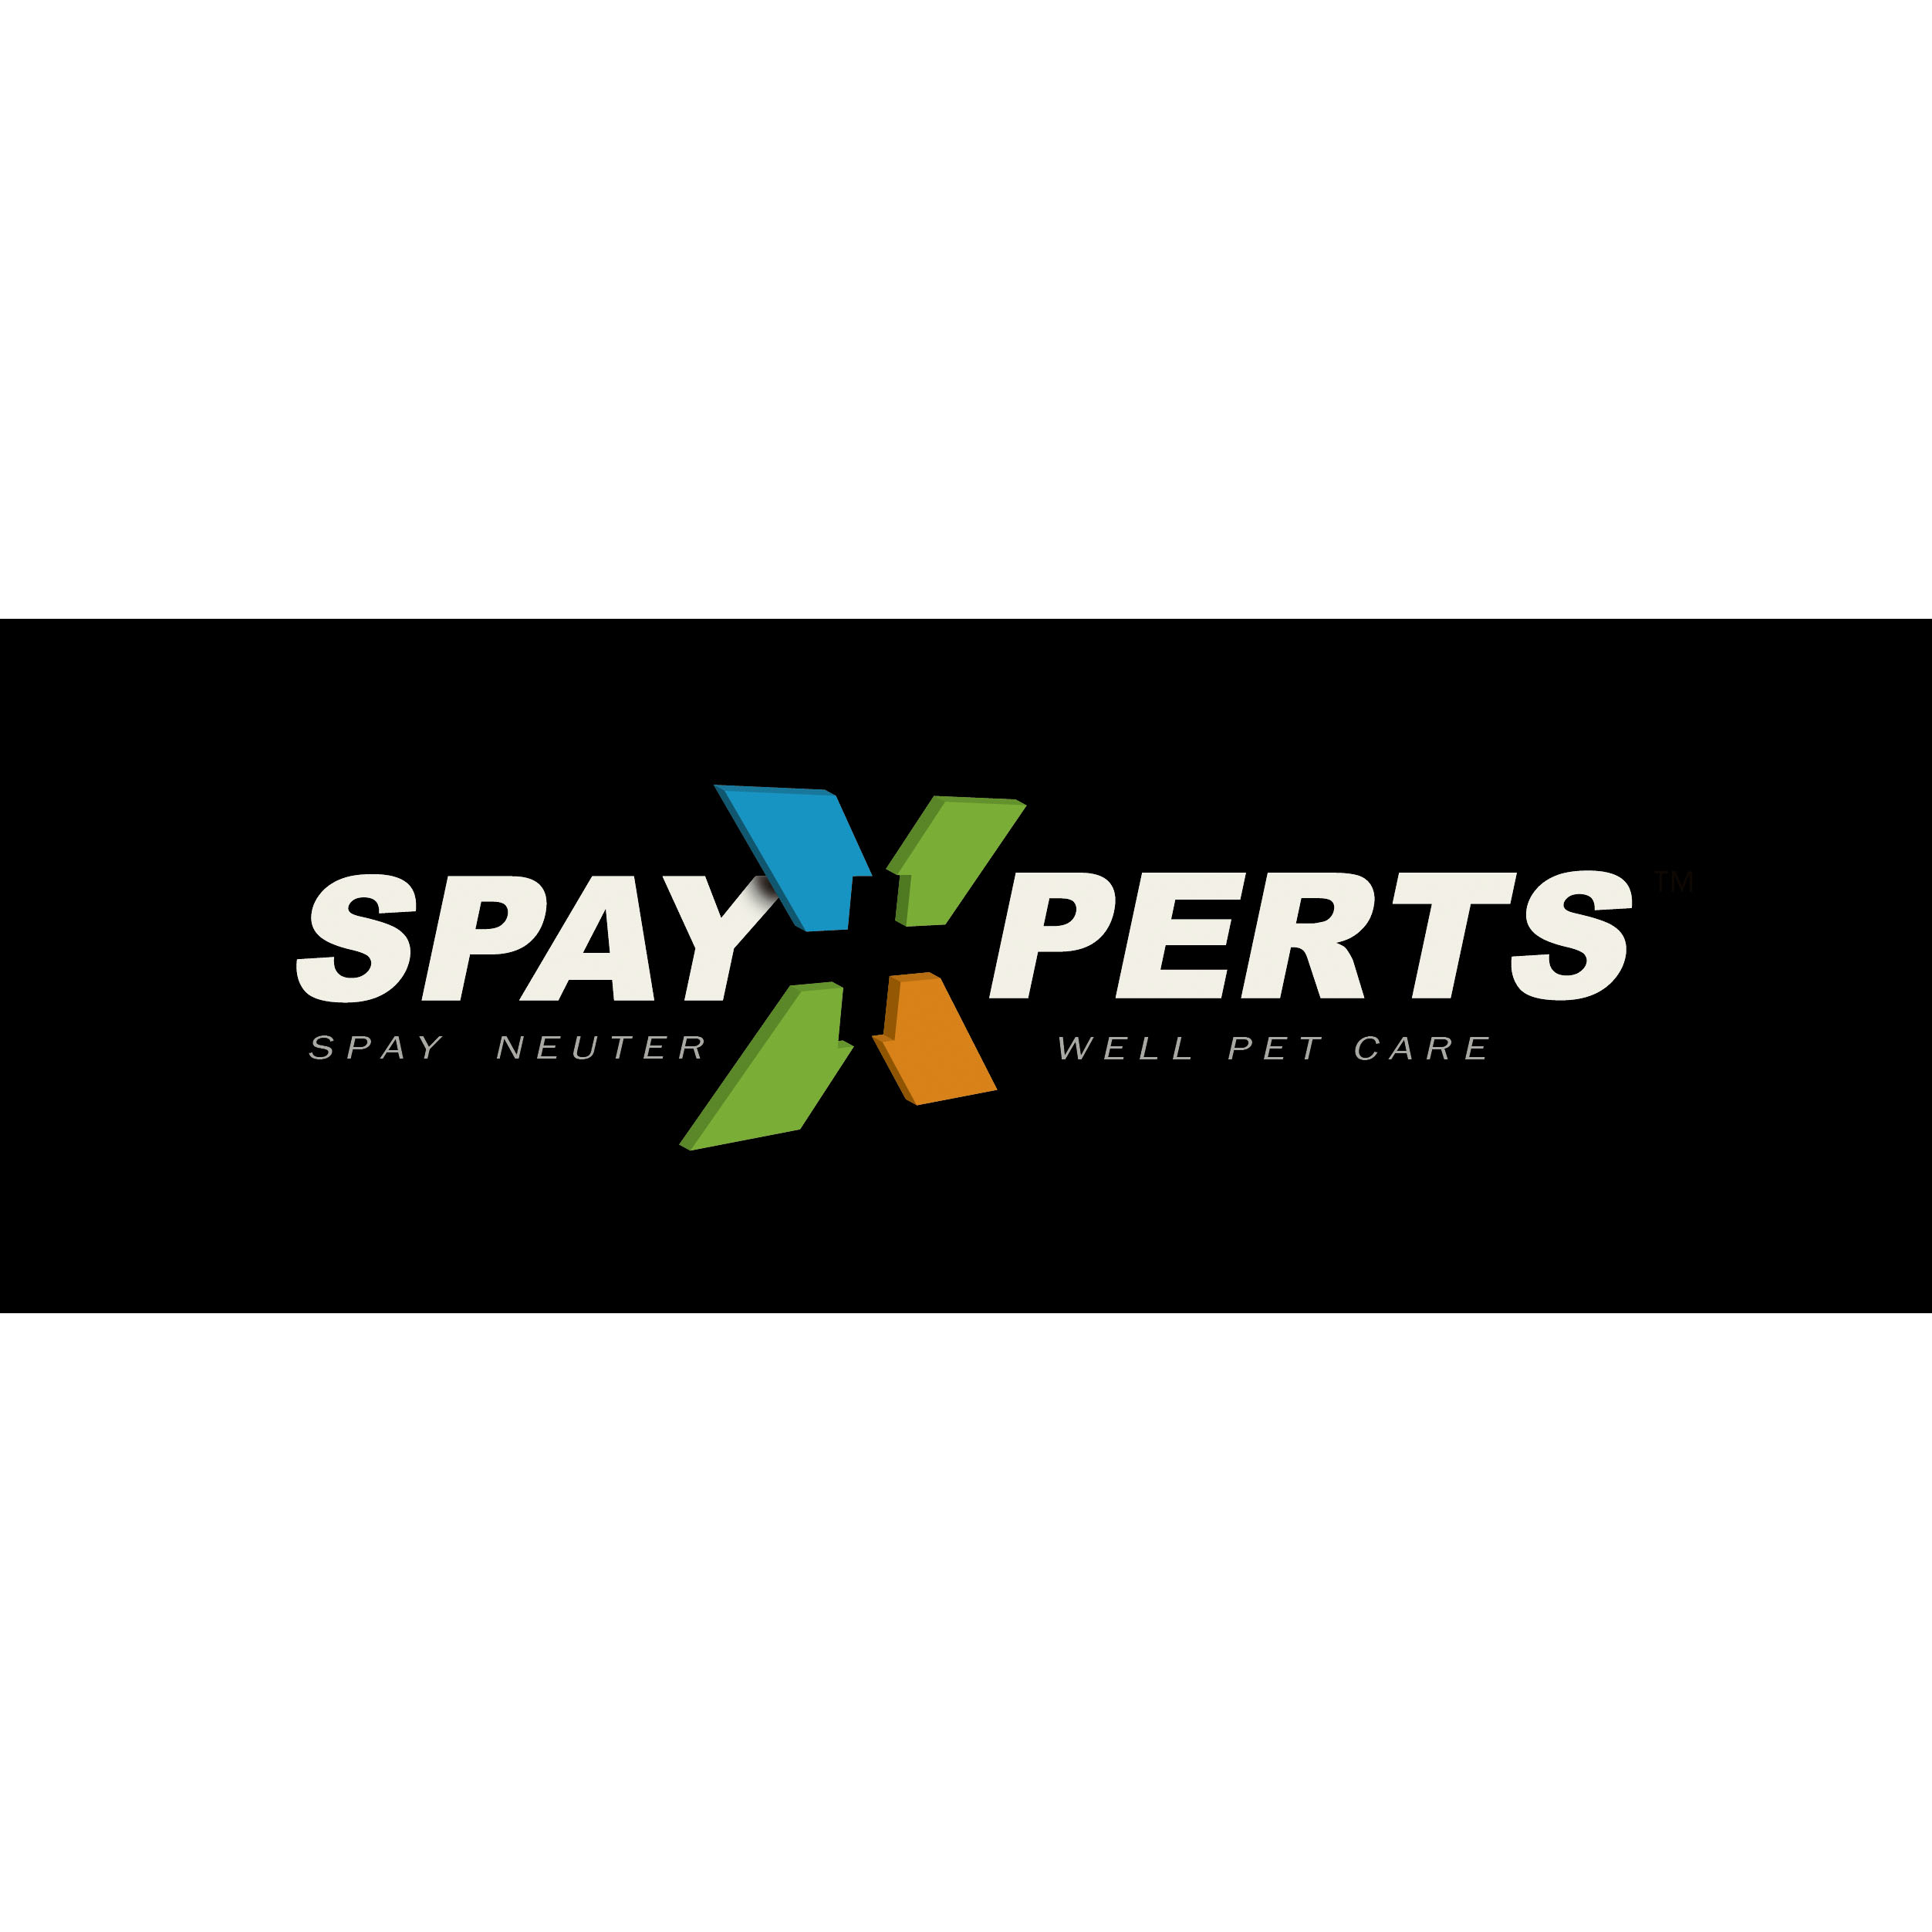 SpayXperts, Spay Neuter & Well Pet Care Coupons near me in ...